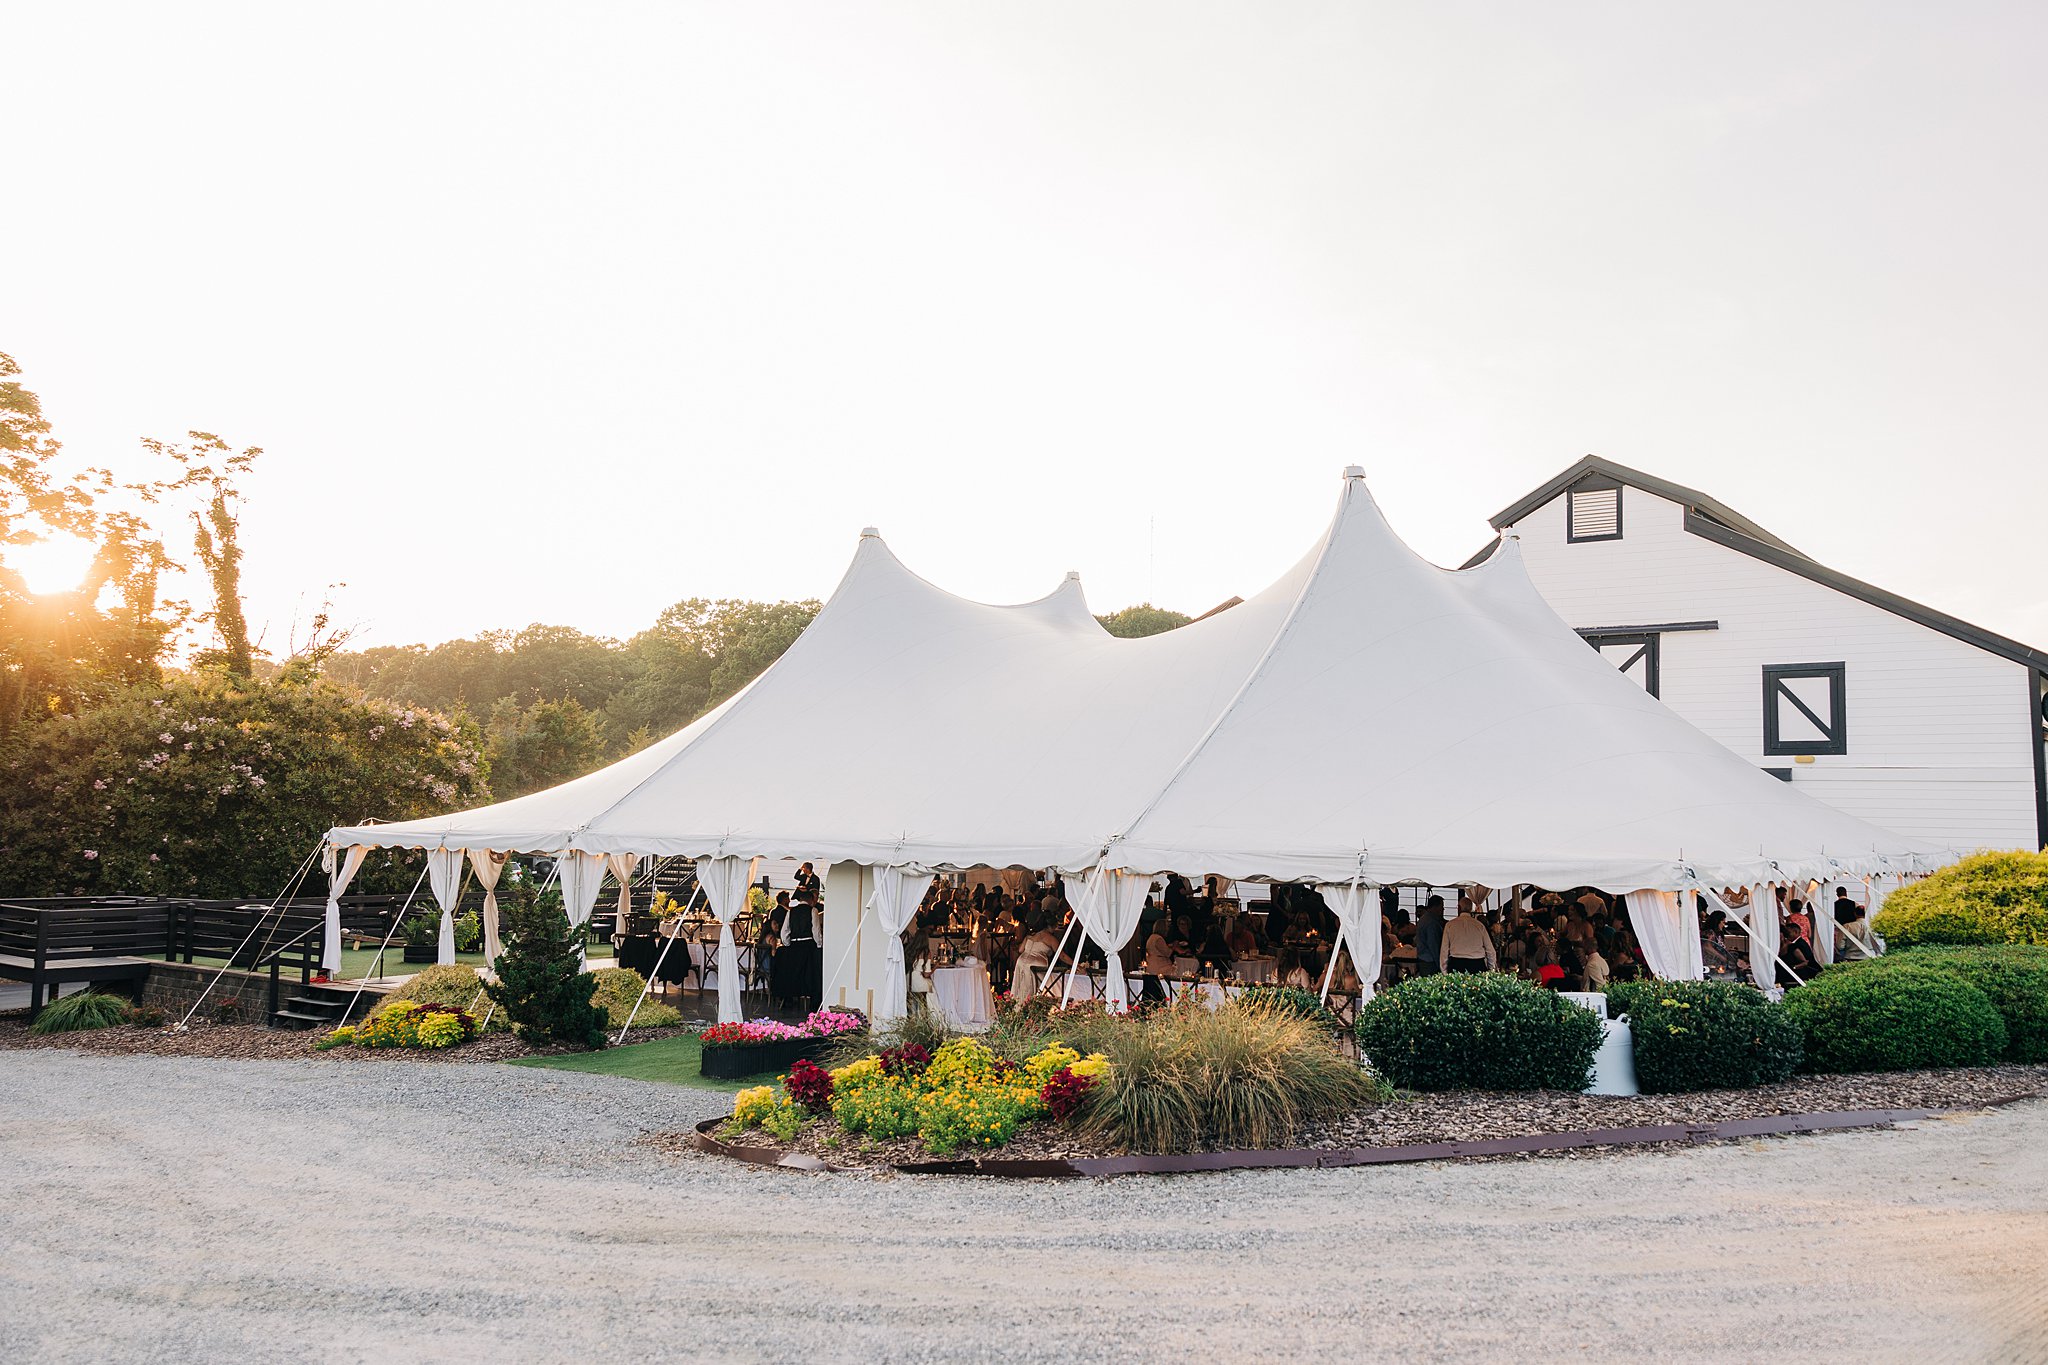 A view of a white wedding reception tent set up in a colorful garden at the Summerfield Farms wedding venue